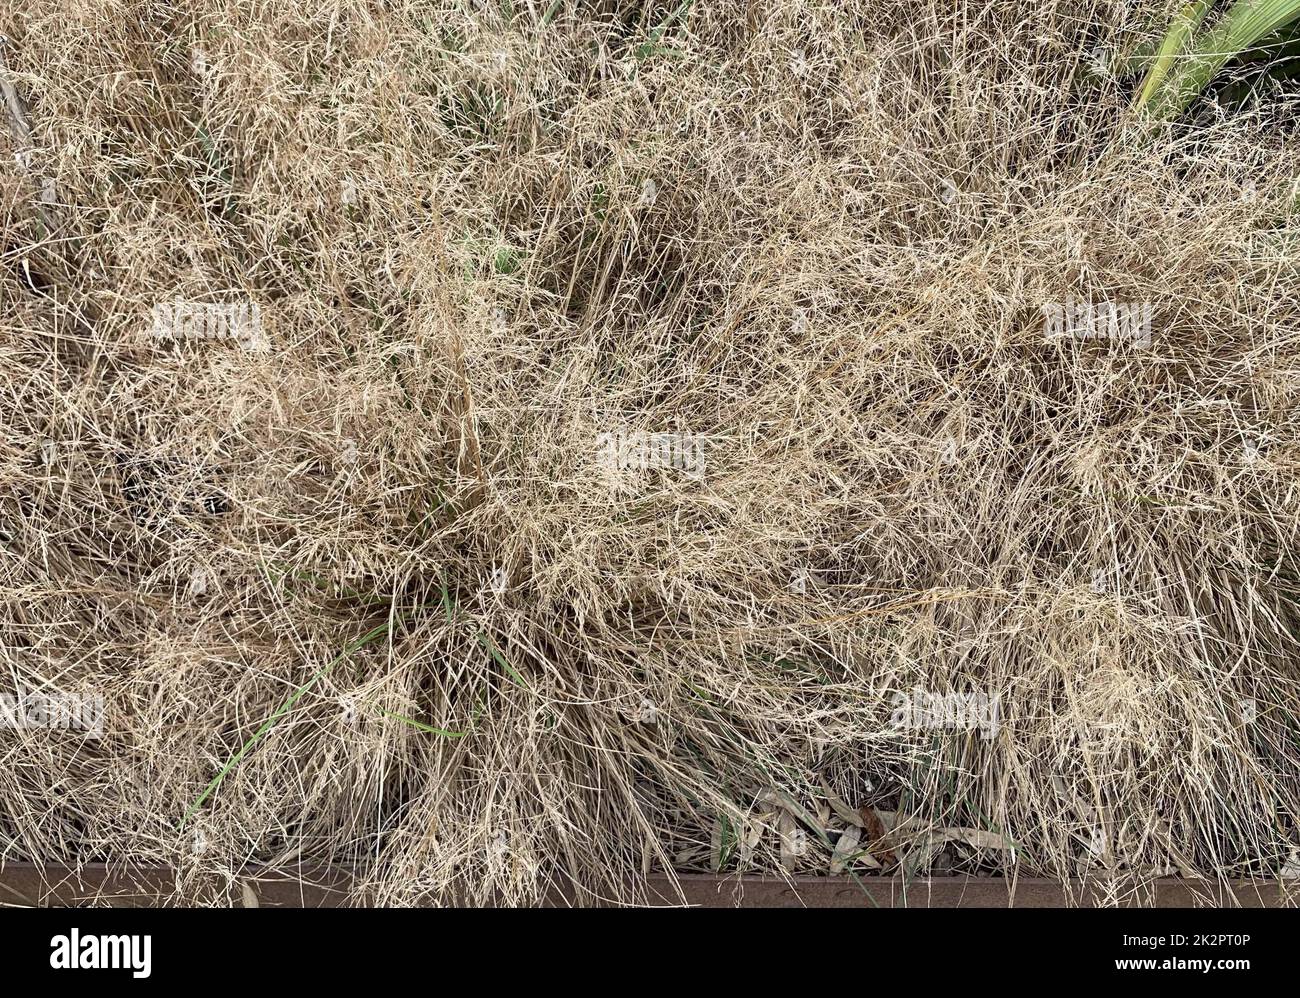 Close up of the soft golden yellow coloured evergreen ornamental tufted hair grass Deschampsia cespitosa Goldtau seen in the UK in late September Stock Photo